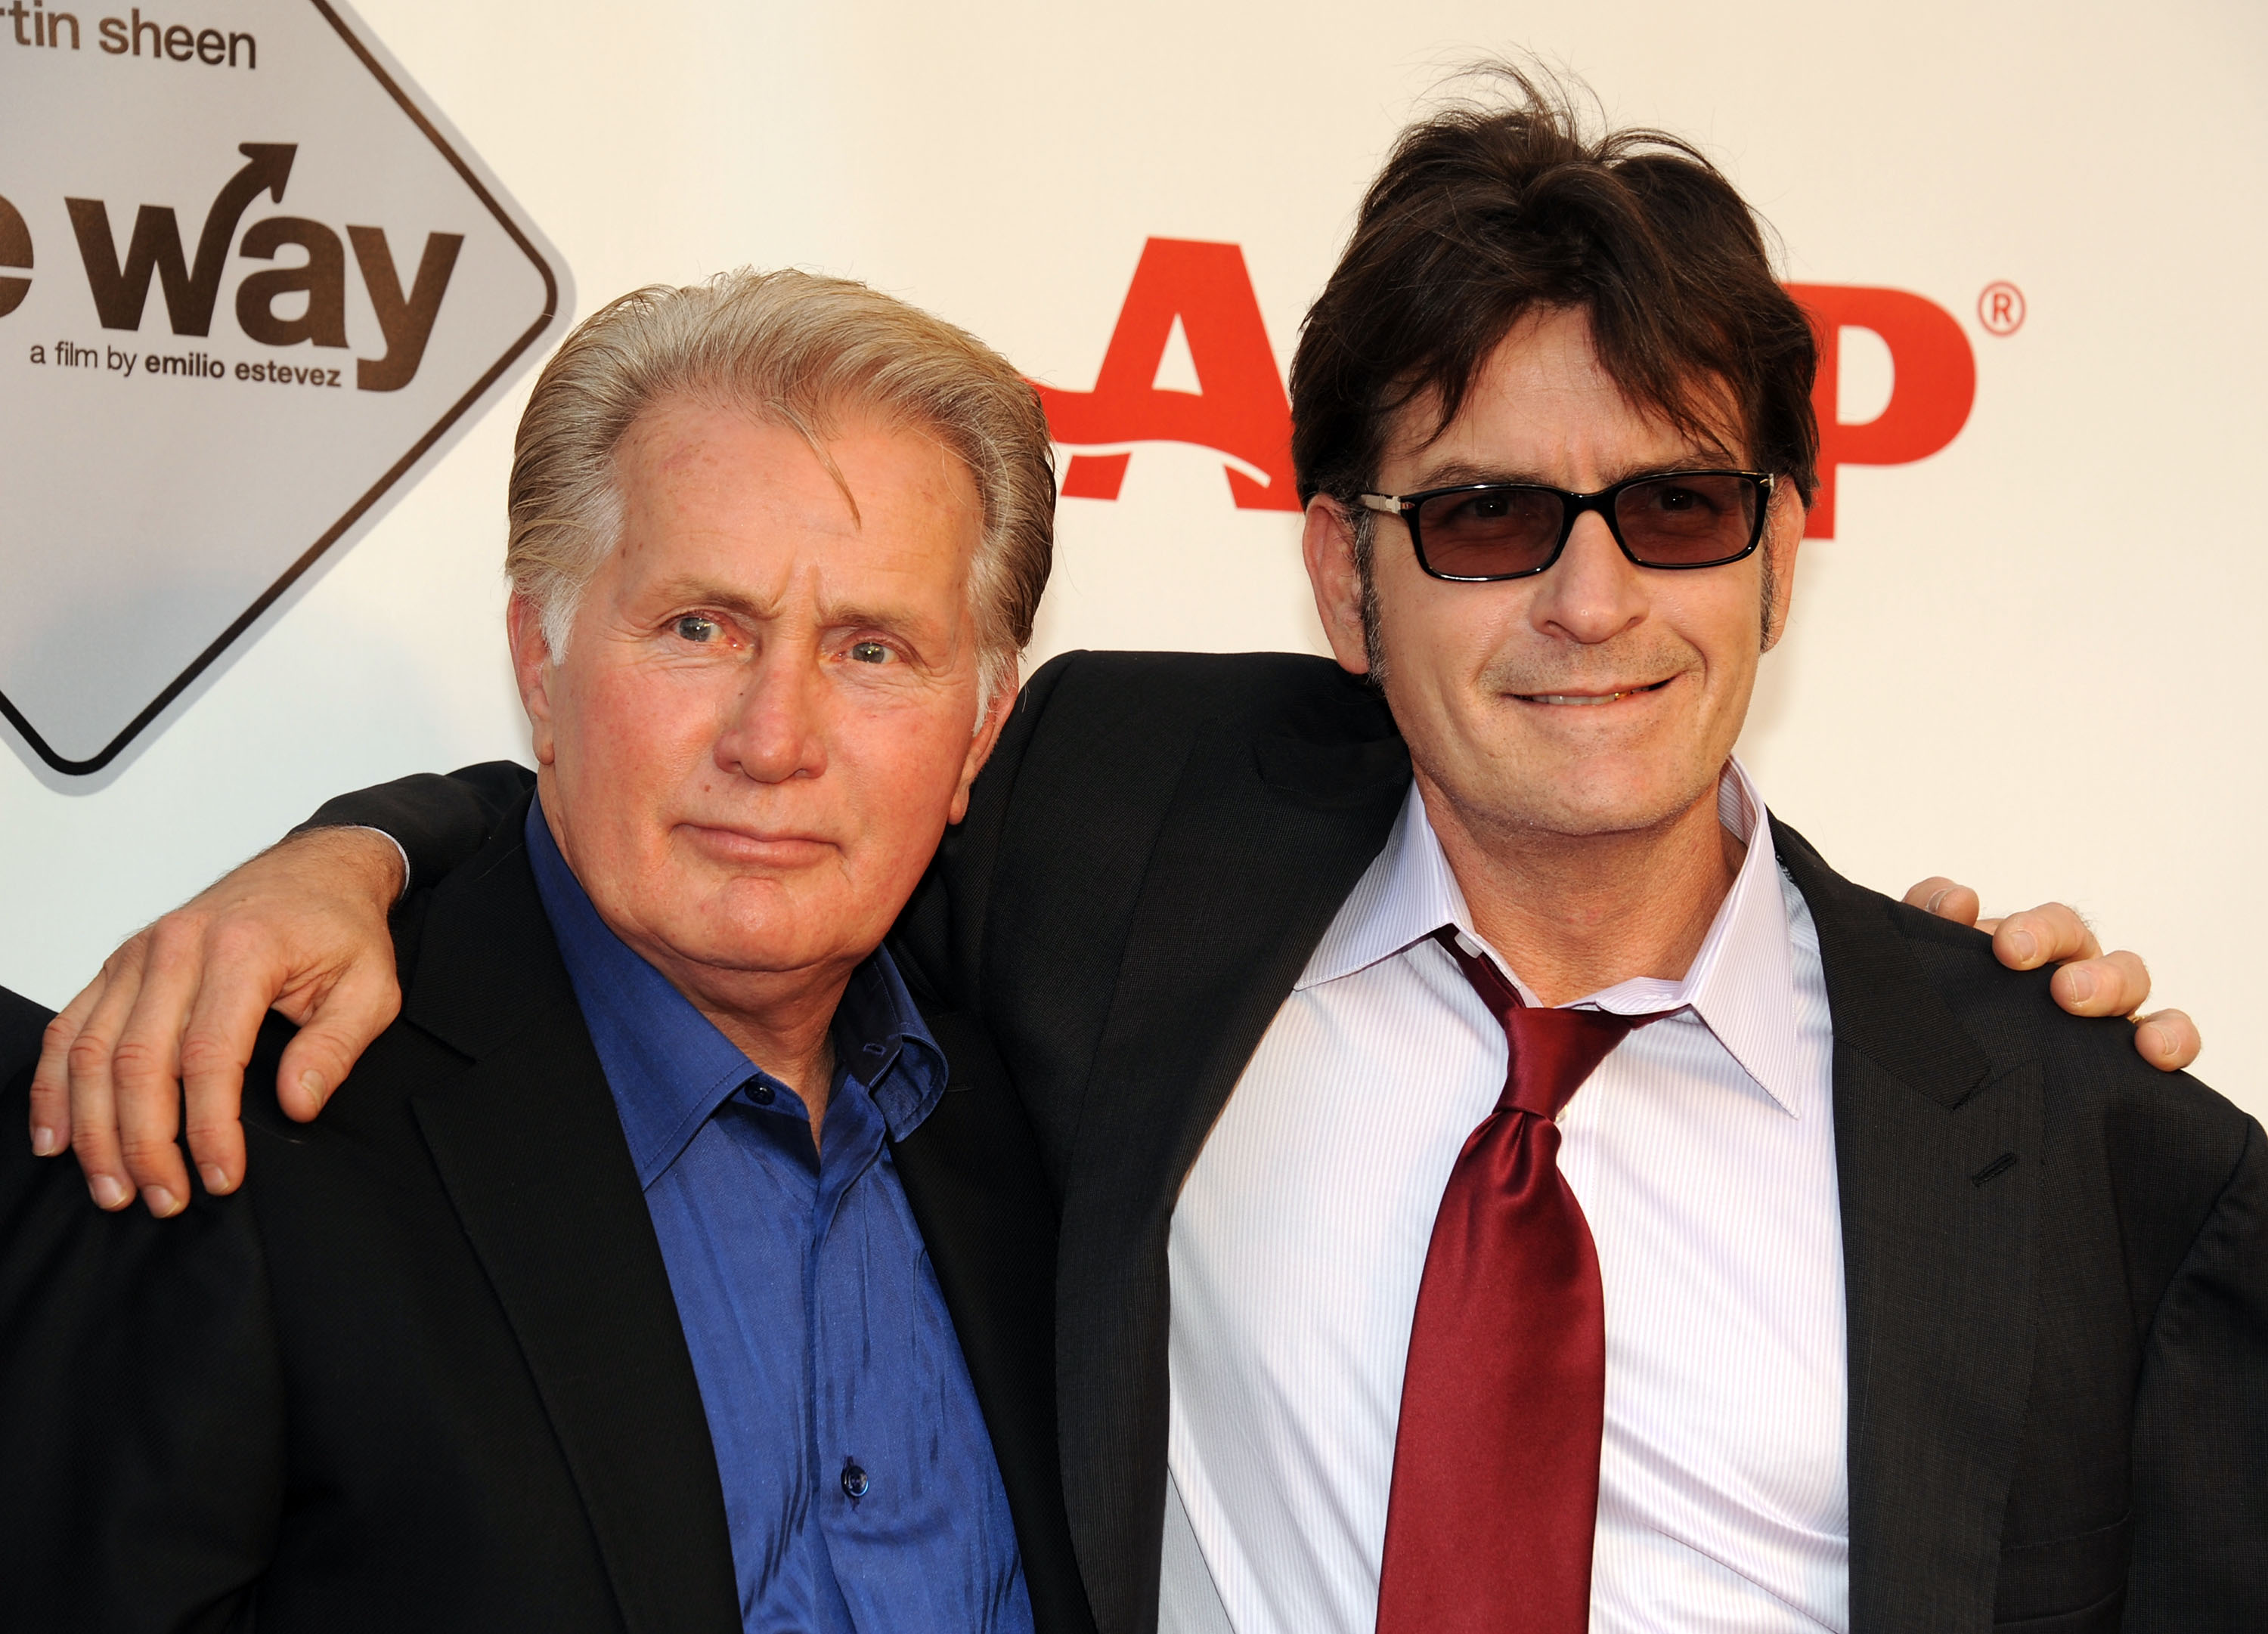 Martin Sheen and Charlie Sheen attend the screening of "The Way" on September 23, 2011 in Los Angeles, California | Source: Getty Images